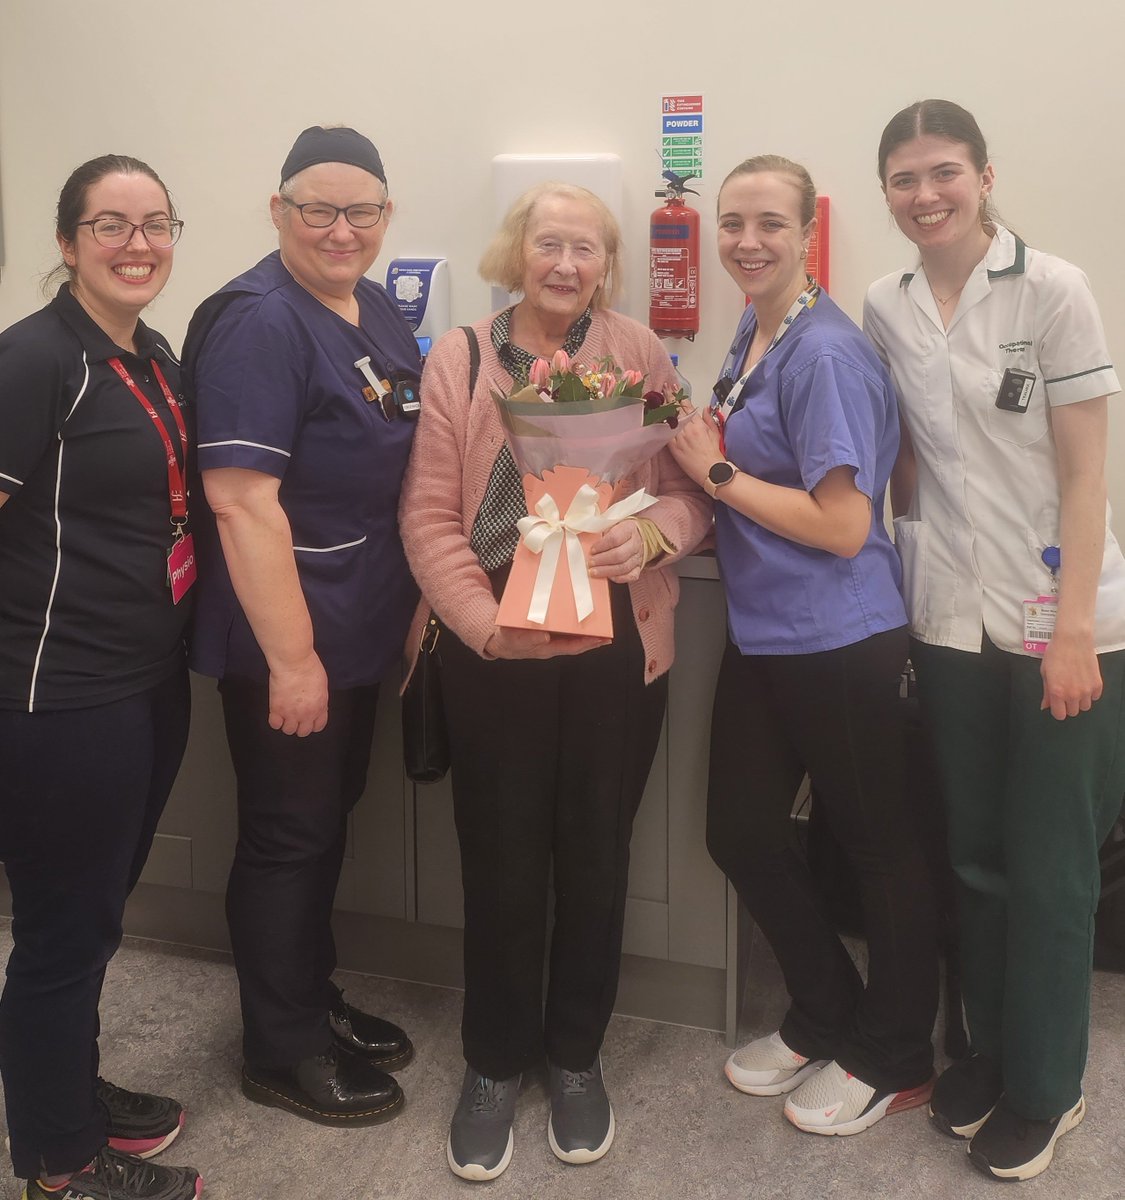 5 weeks ago today our first Trauma Rehab patient came to St. Gemma's Ward. She left for home today, mobilising independently. Special thanks to @VPFlowers who donated a beautiful bouquet to mark the occasion. @MaterTrauma @MaterHSCPs Shared with permission